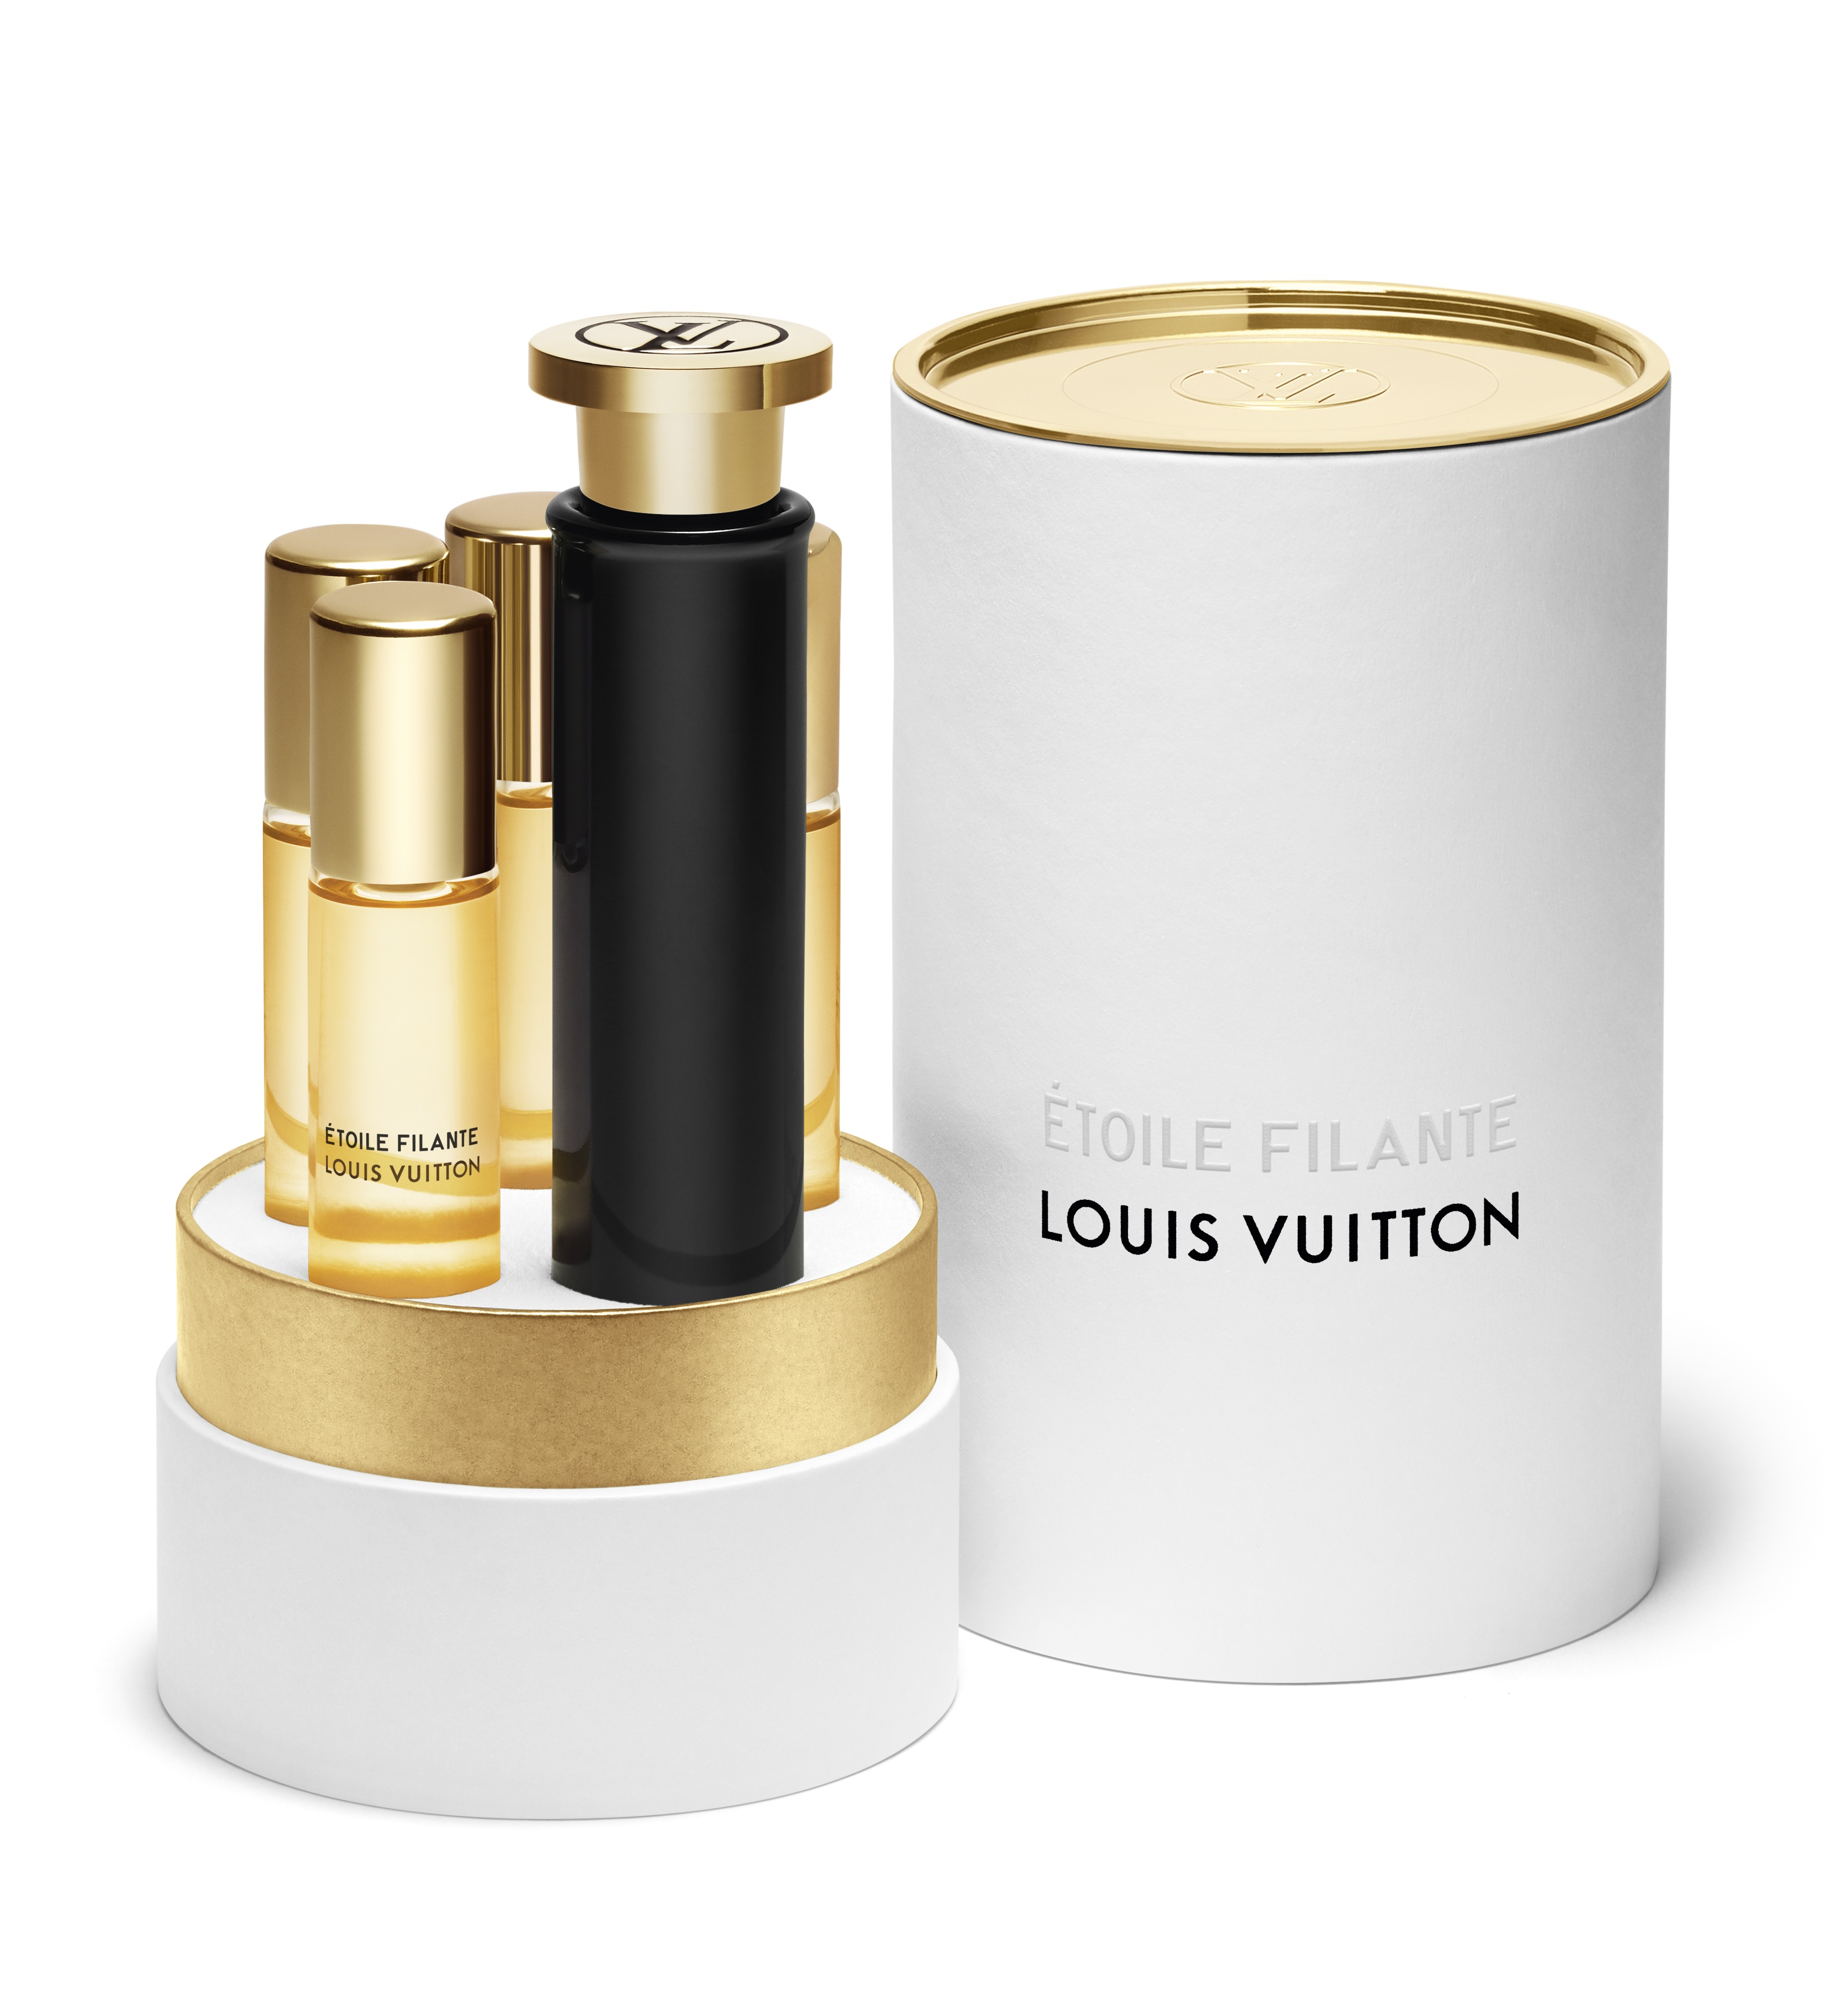 Louis Vuitton Étoile Filante is the latest addition to the Maison's travel-inspired  fragrances – Yakymour